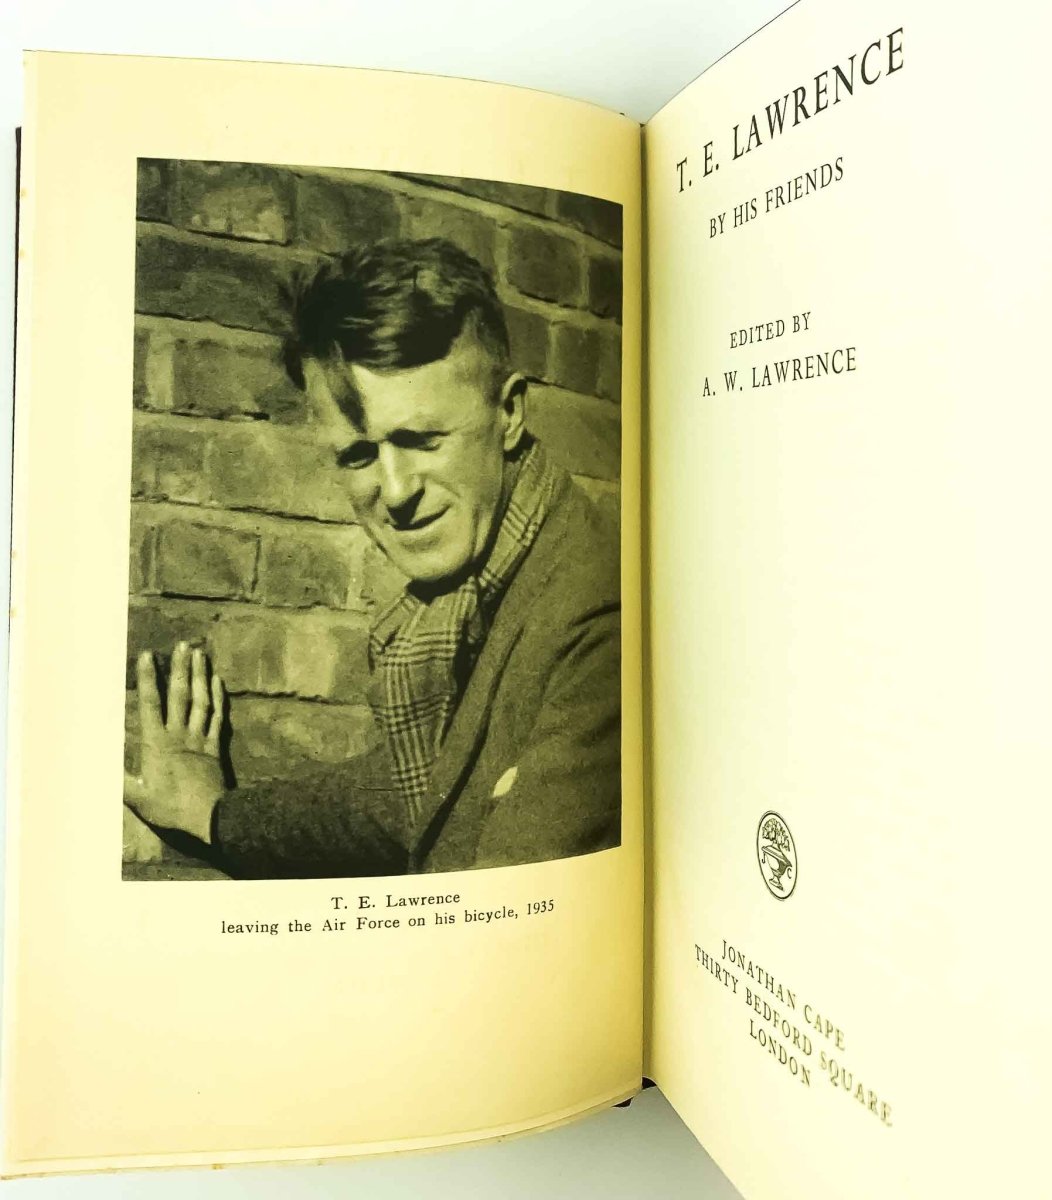 Lawrence, A.W. ( Edits ) - T E Lawrence by his Friends | image3